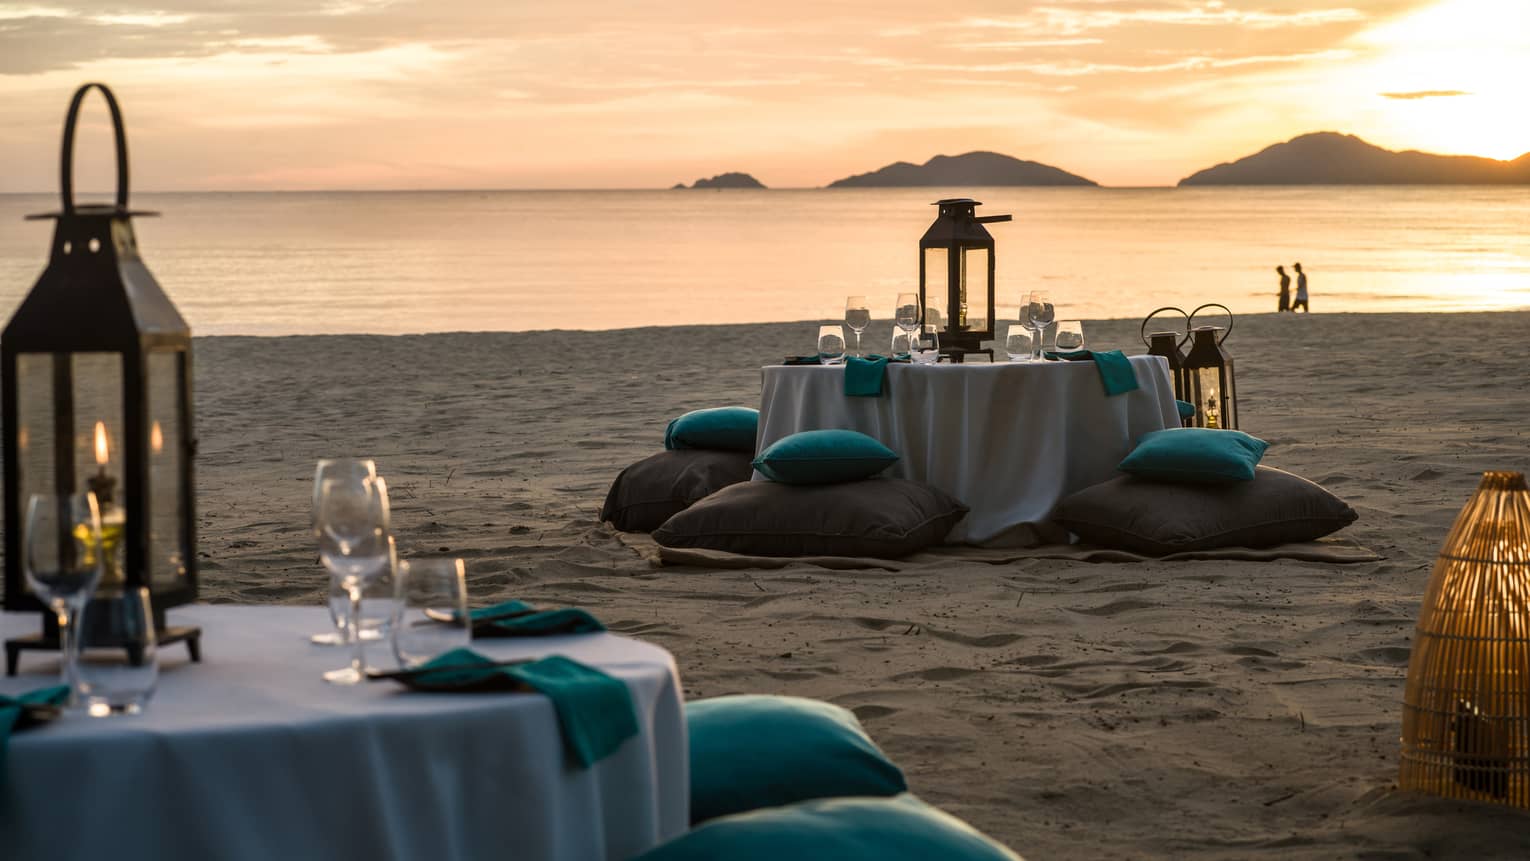 Two tables with white cloths, glasses, lanterns and turquoise cushions on sandy beach at dusk 